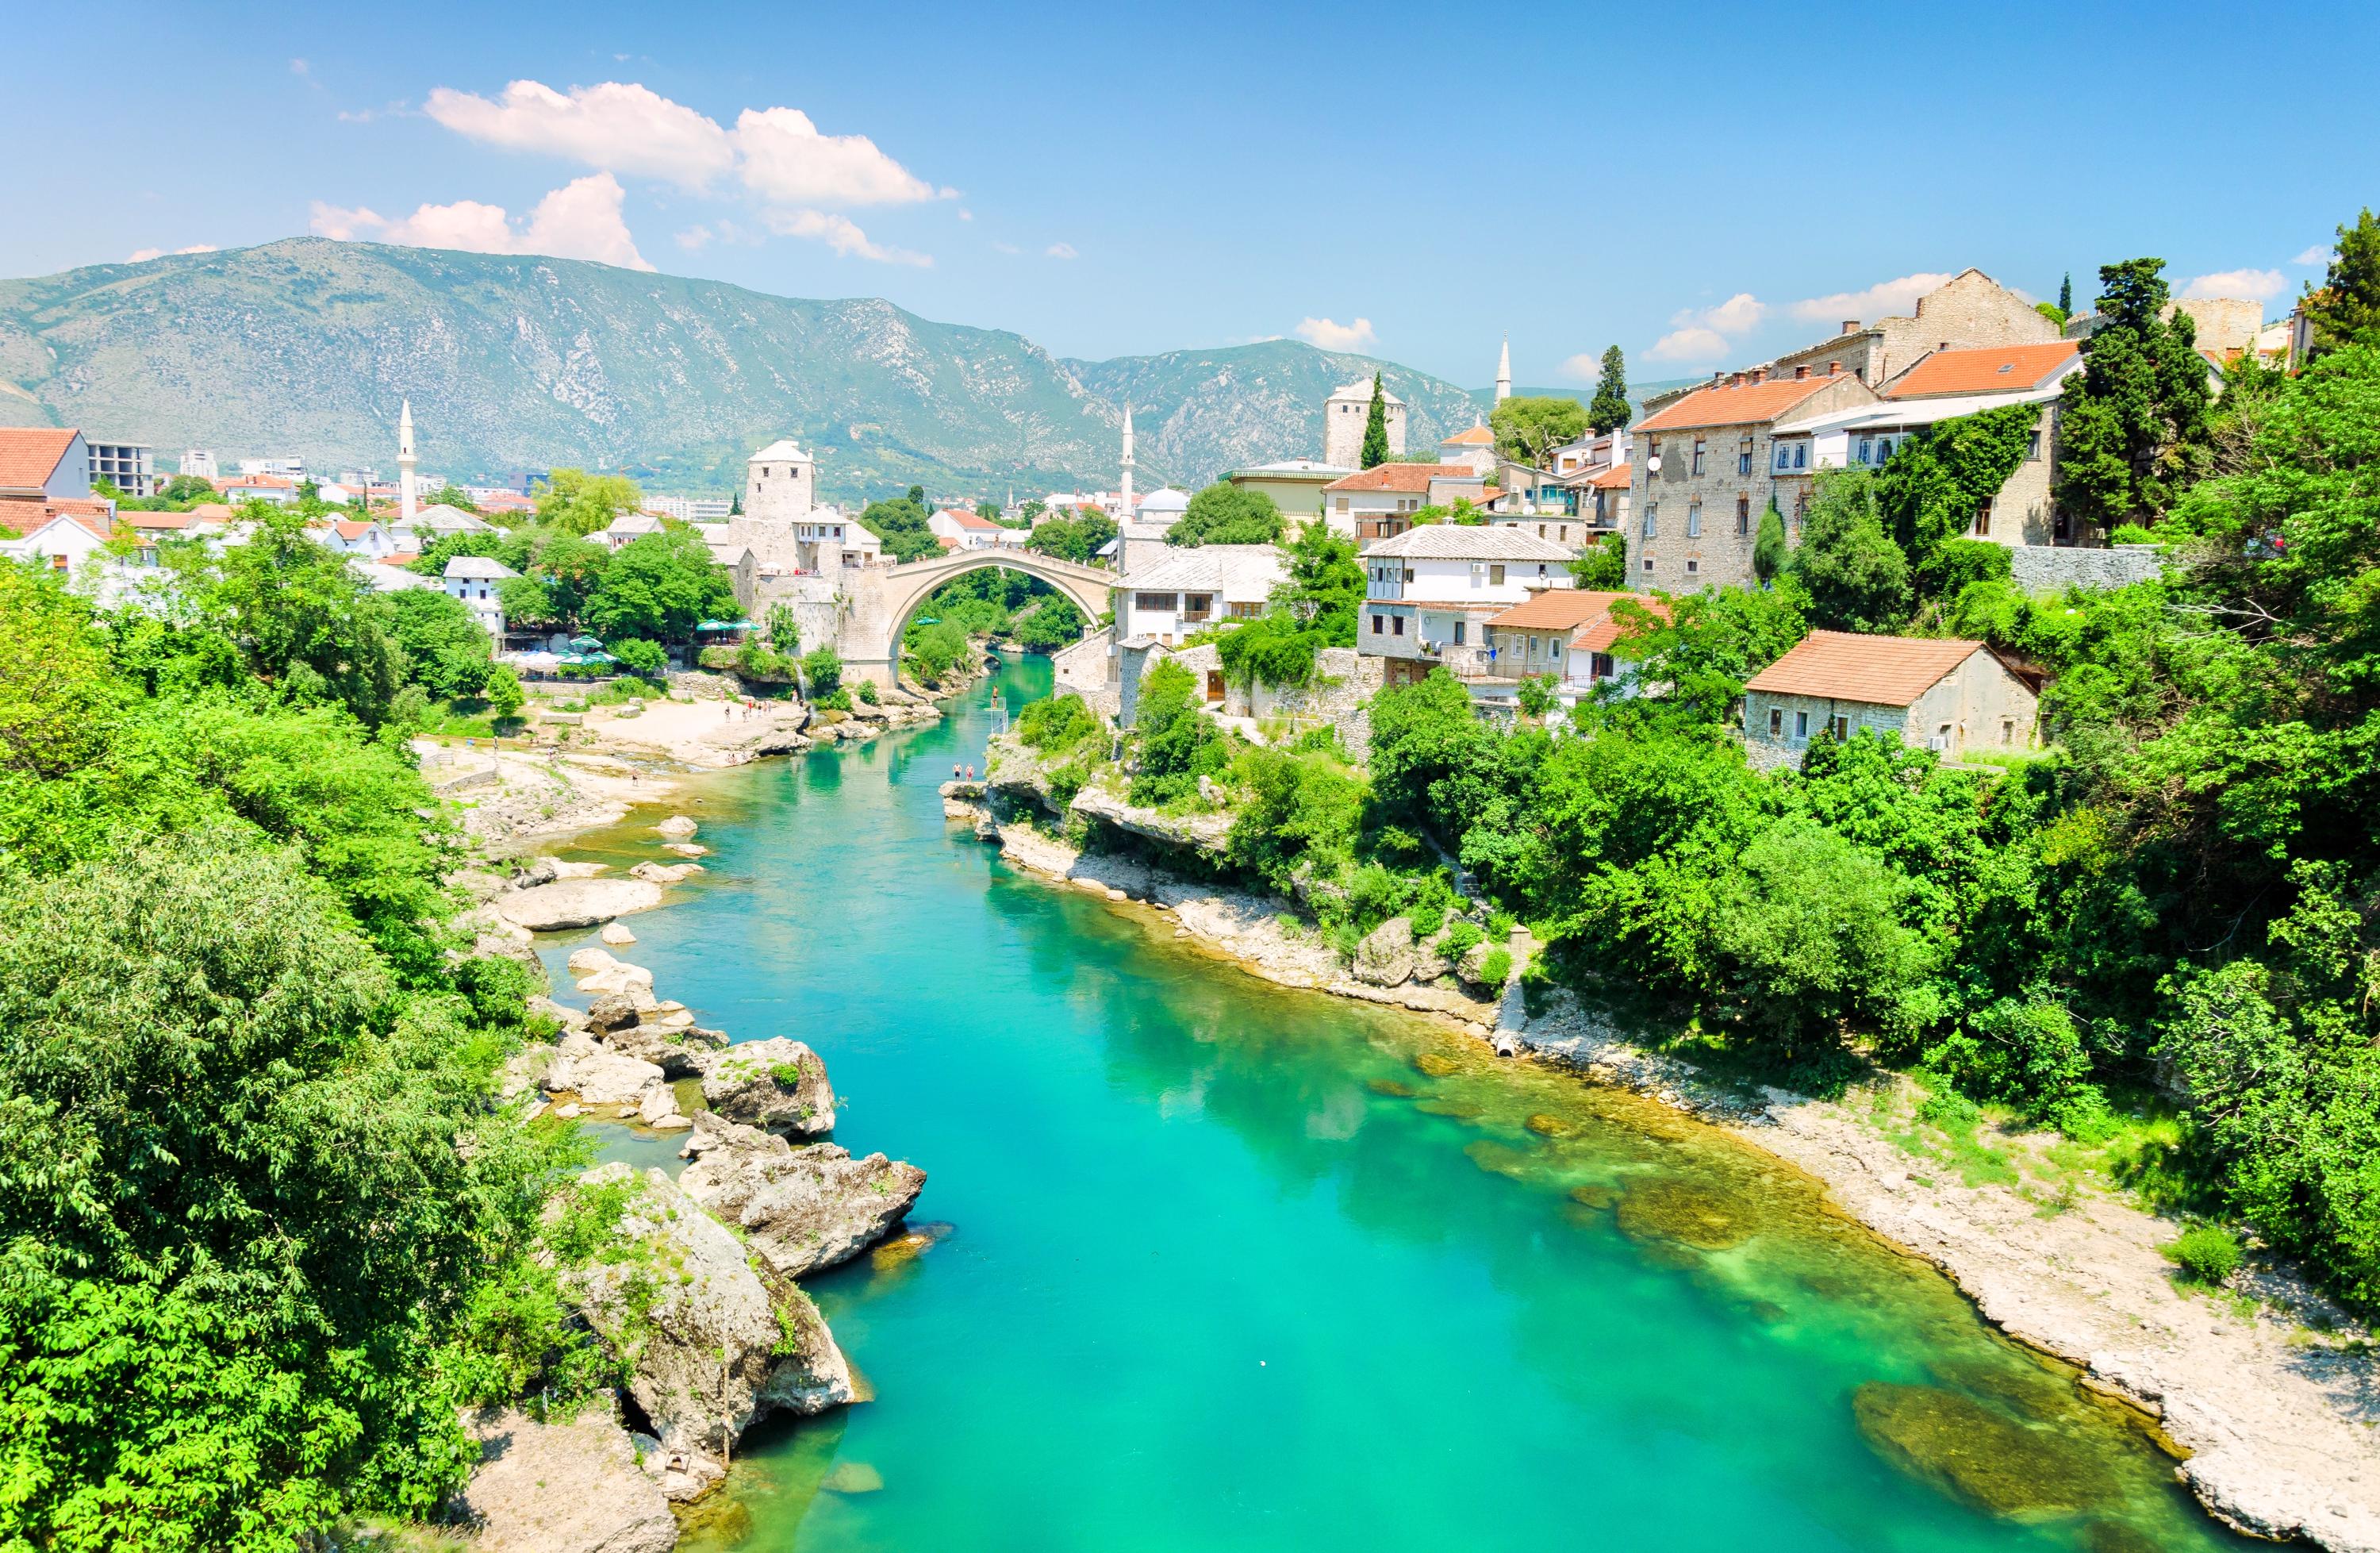 Discover the city of Mostar and its old bridge in Bosnia and Herzegovina